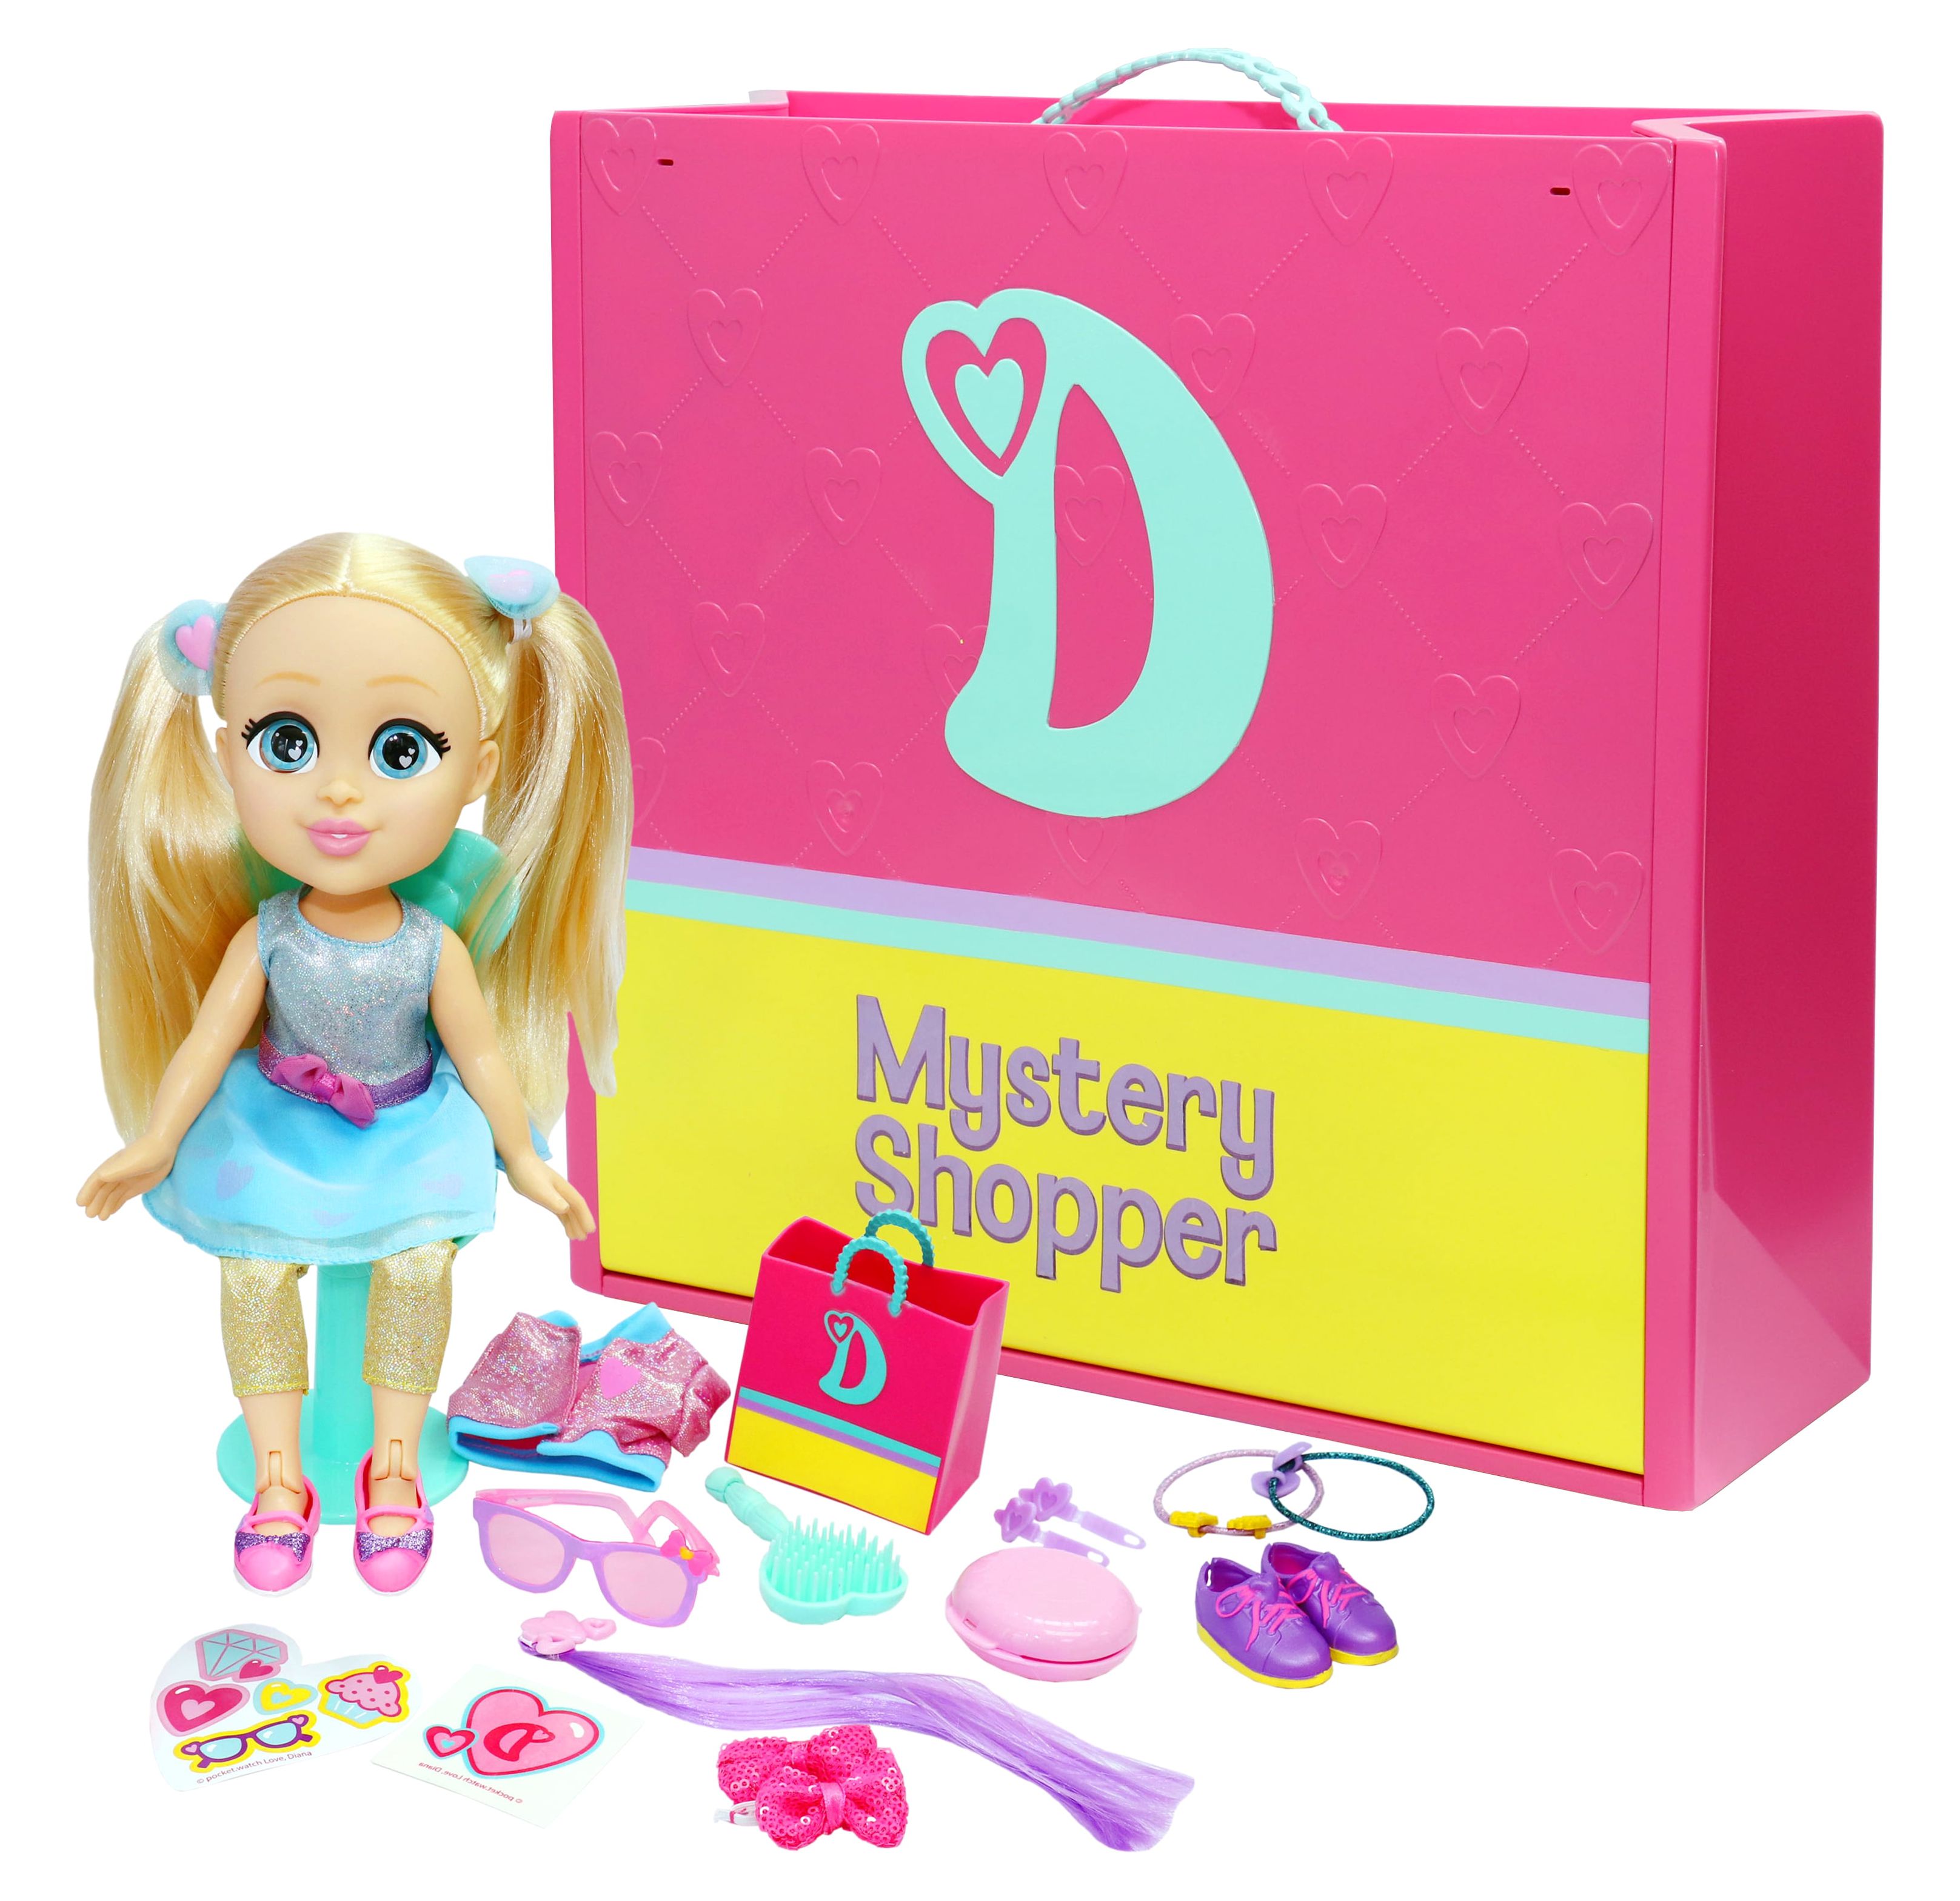 Love Diana Mystery Shopper Playset With 13 inch Doll Plus 12 Surprises, For Ages 3+ - image 1 of 14